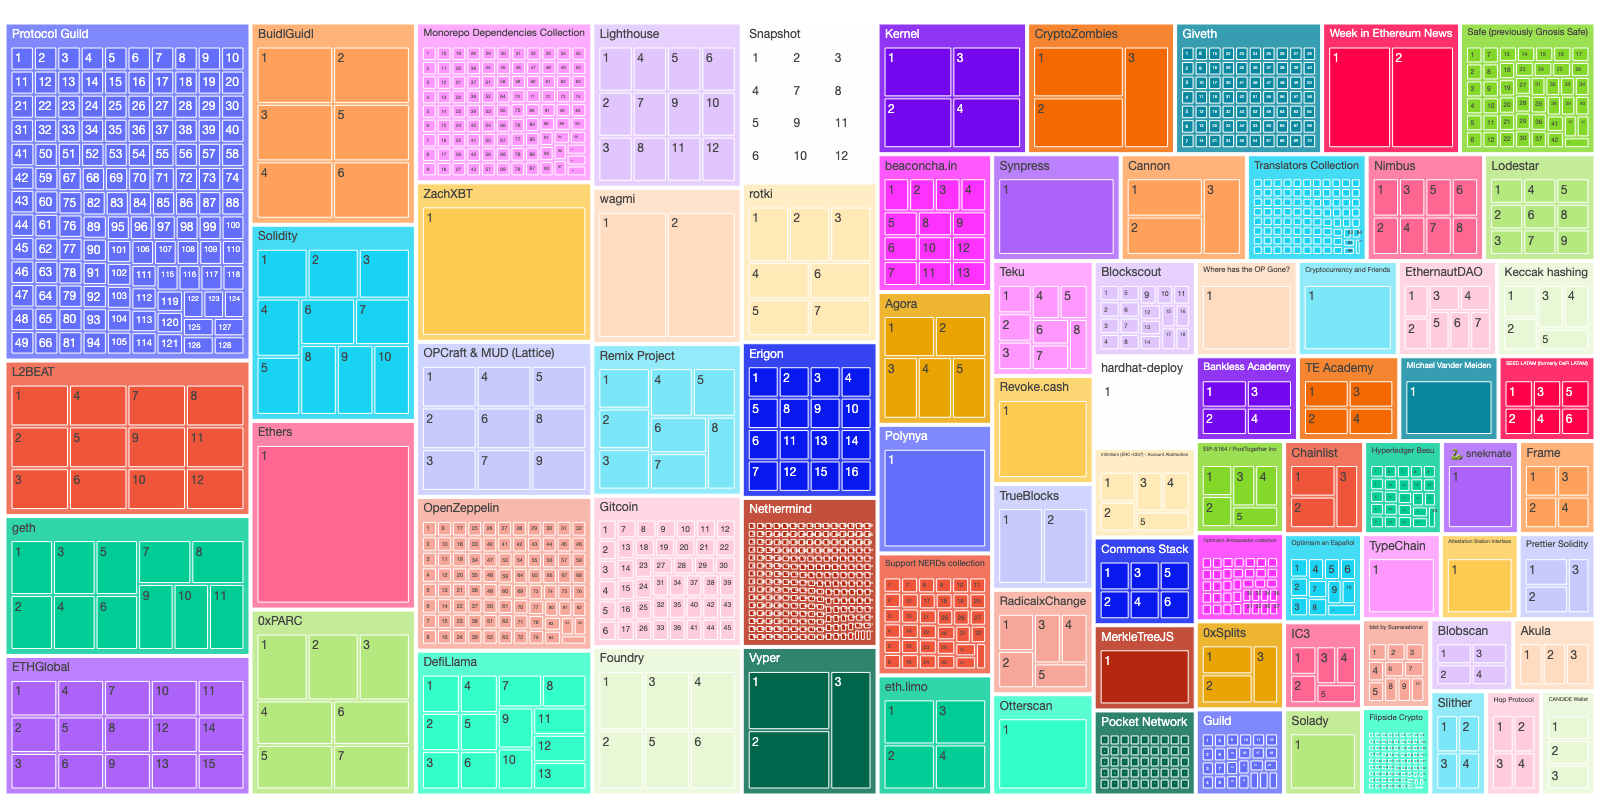 Treemap of the illustrative "share" of RPGF received by each contributor to a project. Solo and small teams tend to receive more RPGF per contributor.